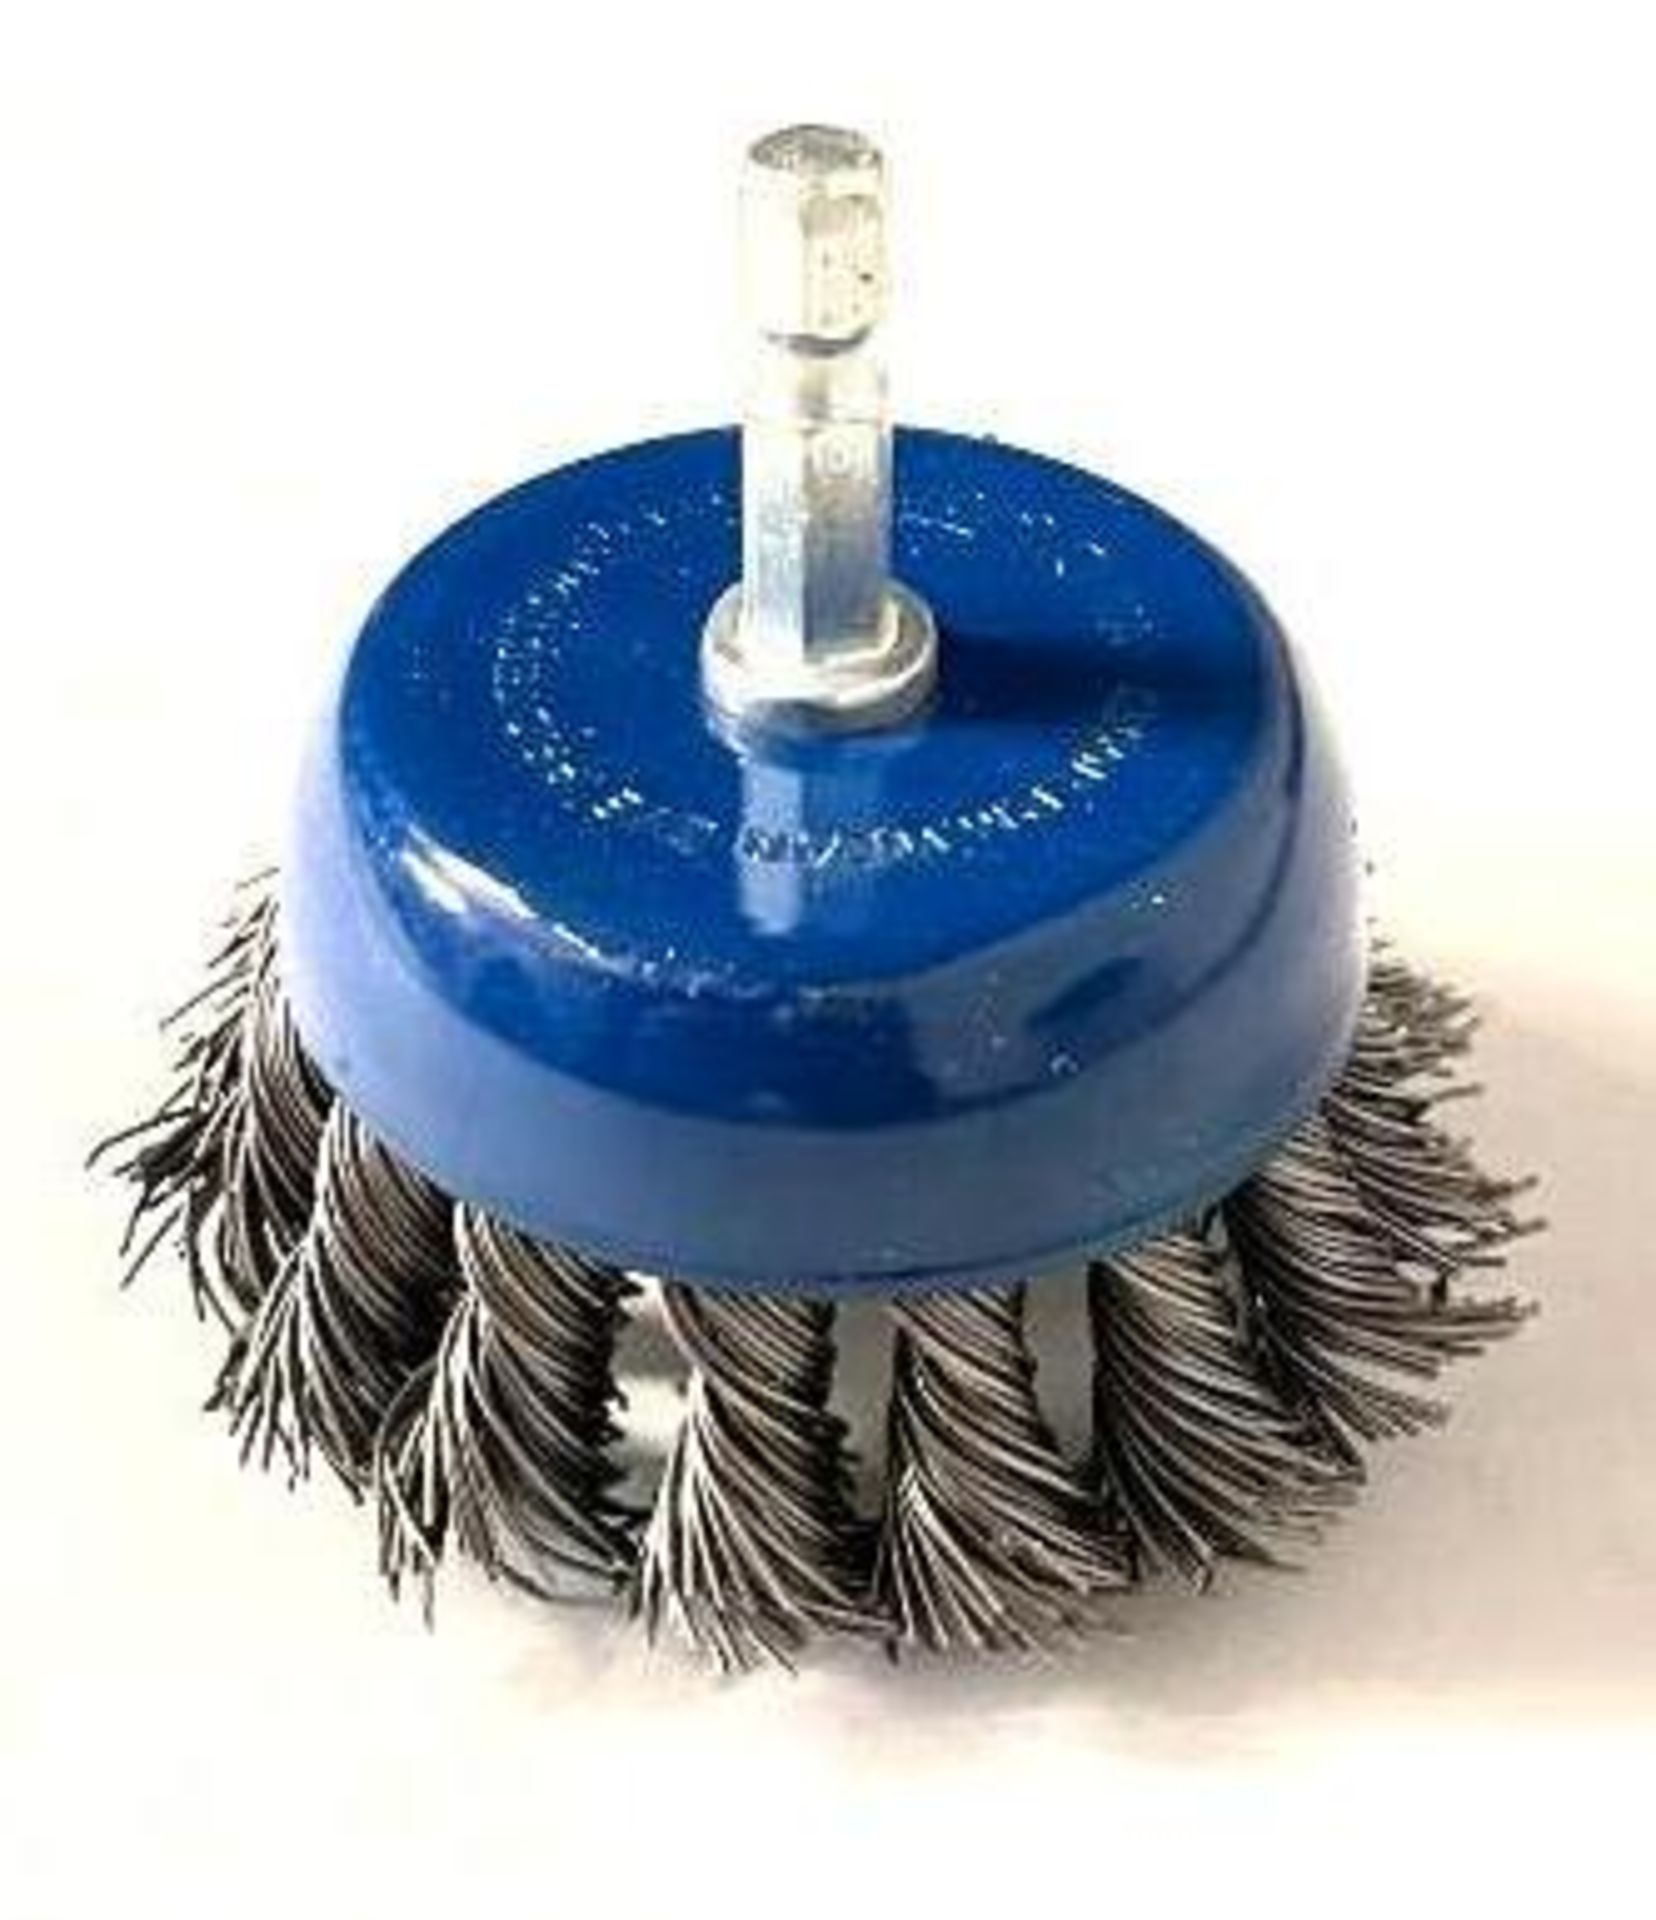 200CT 3" KNOTTED CUP WIRE BRUSHES WITH 1/4" SHANK BRAND/MODEL EAZYPOWER 87934 ADDITIONAL INFO TOTAL